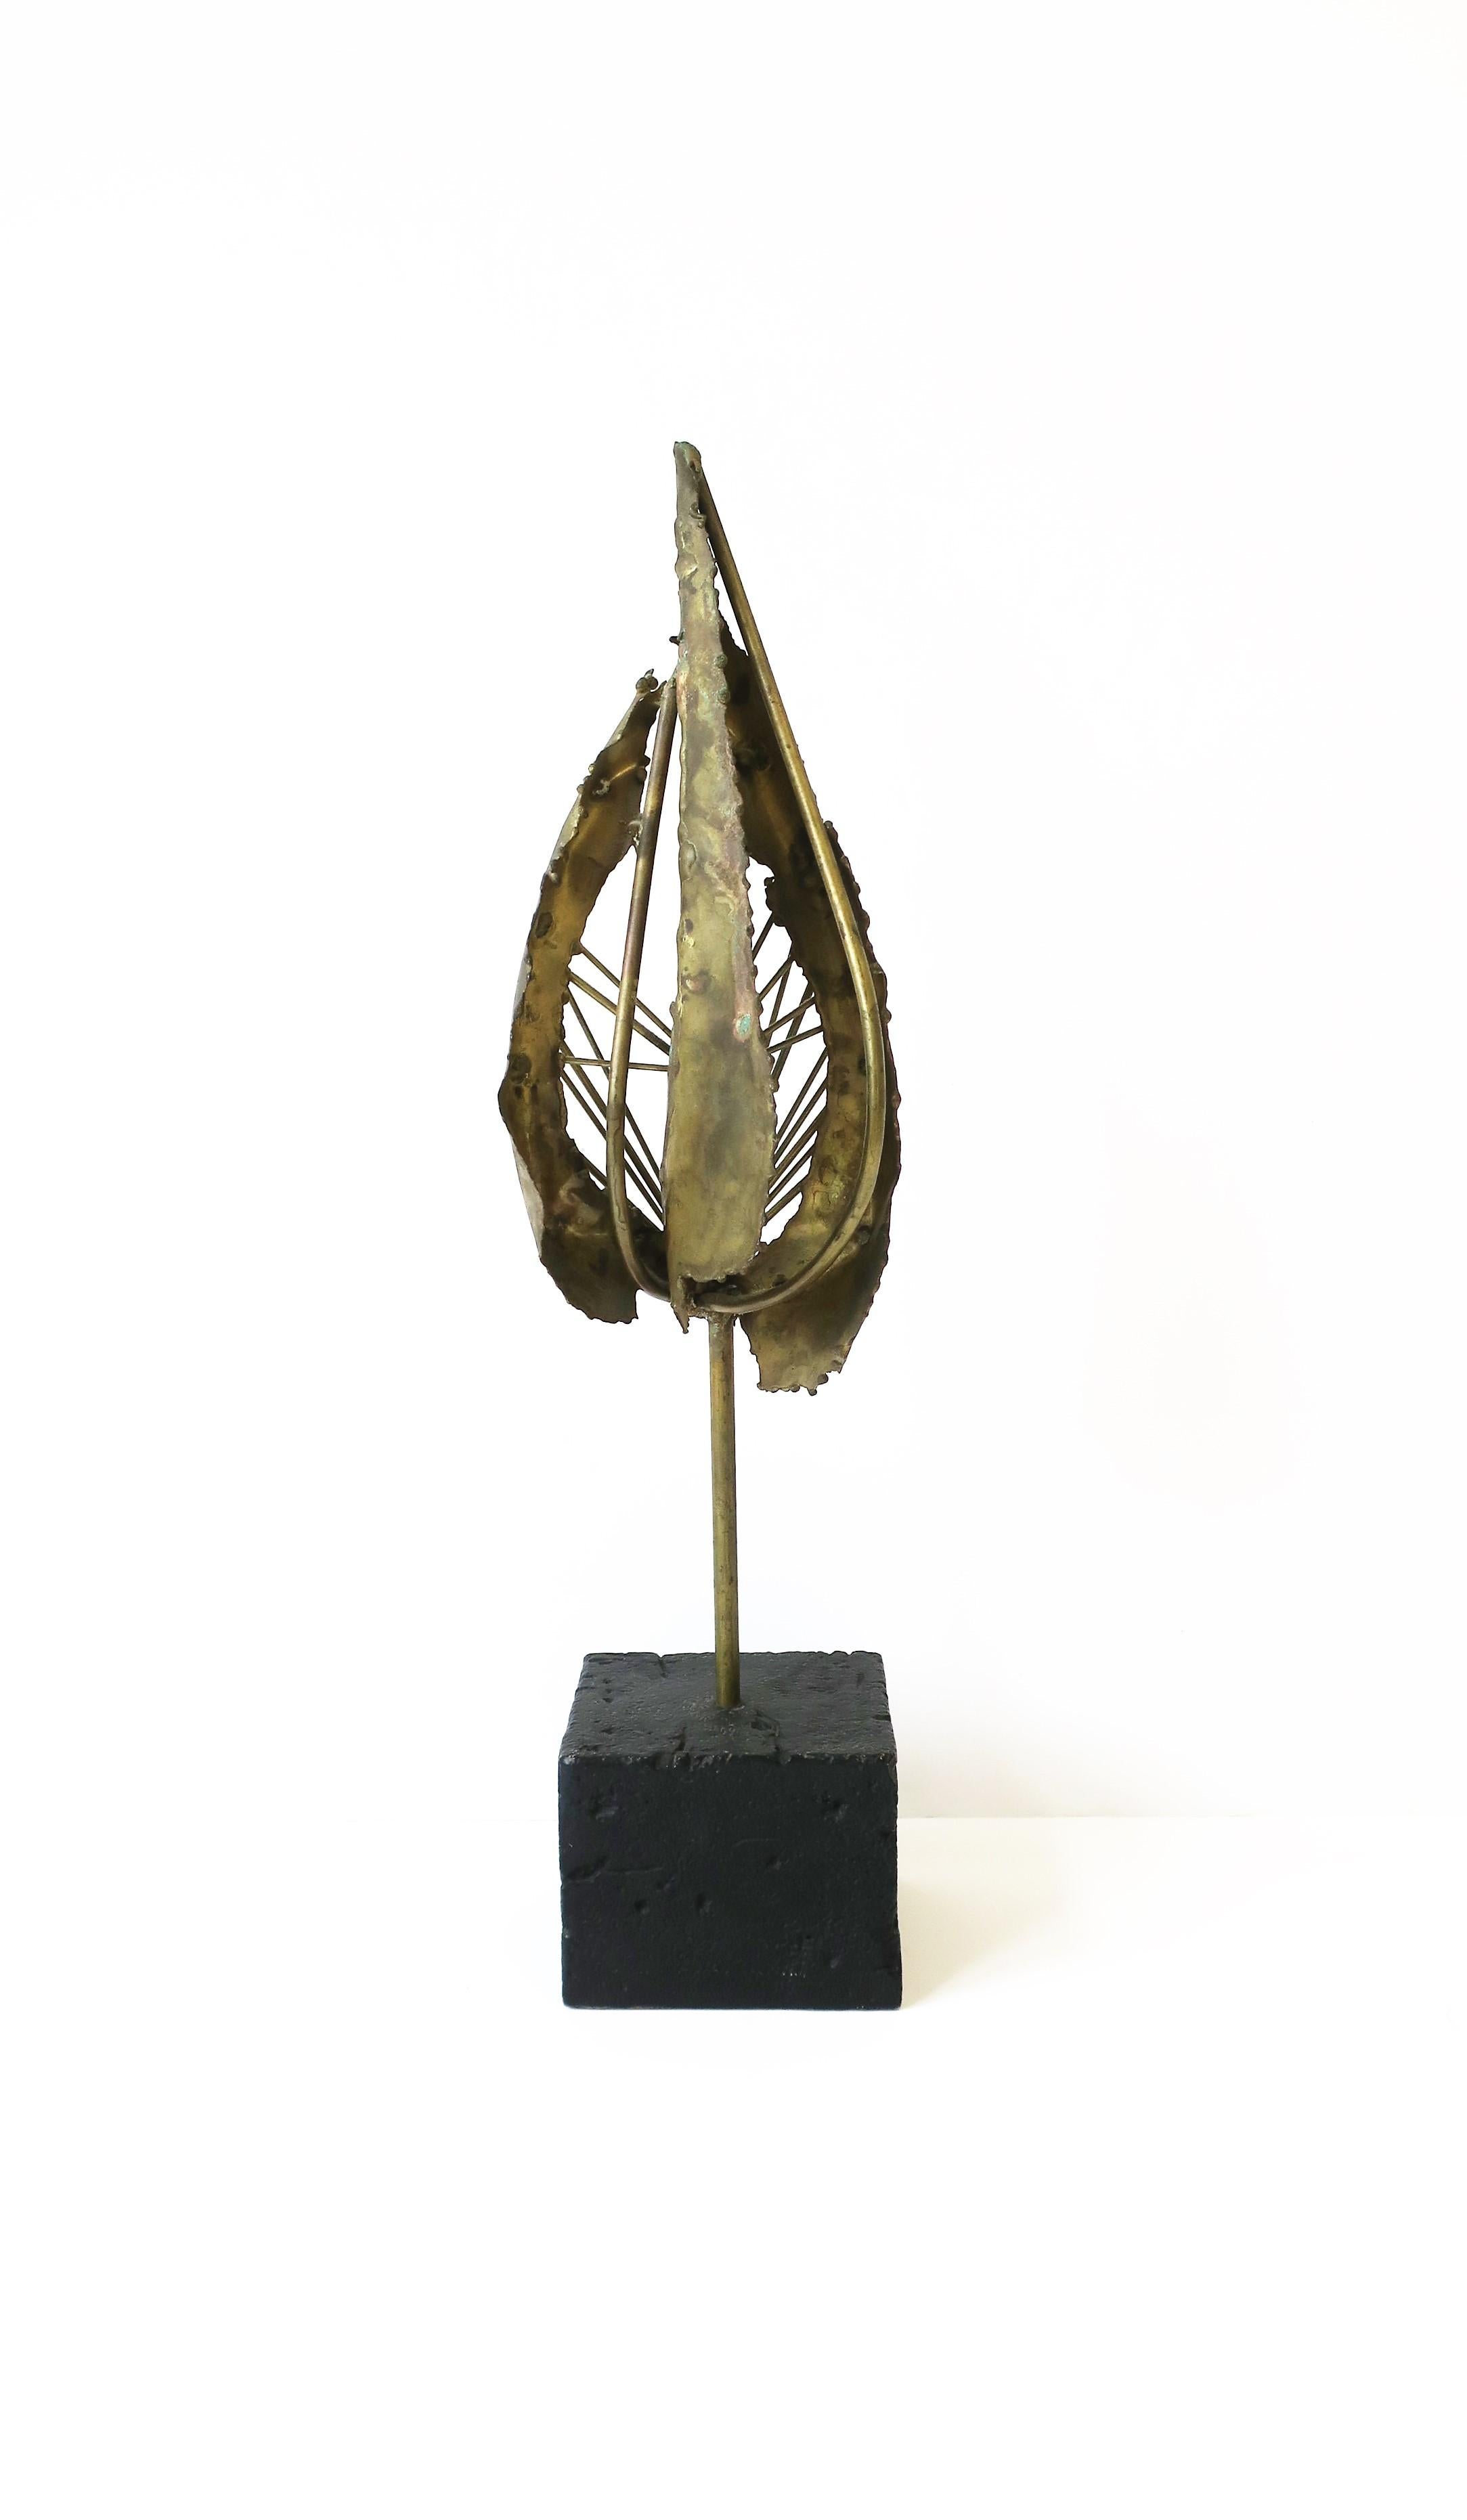 A beautiful hand-made brass sculpture, Midcentury Modern period, circa mid-20th century, 1960s. Piece is unsigned; In the style of designers Paul Evens, Curtis Jere. Piece is all brass with a square black composite base. Very good condition as shown